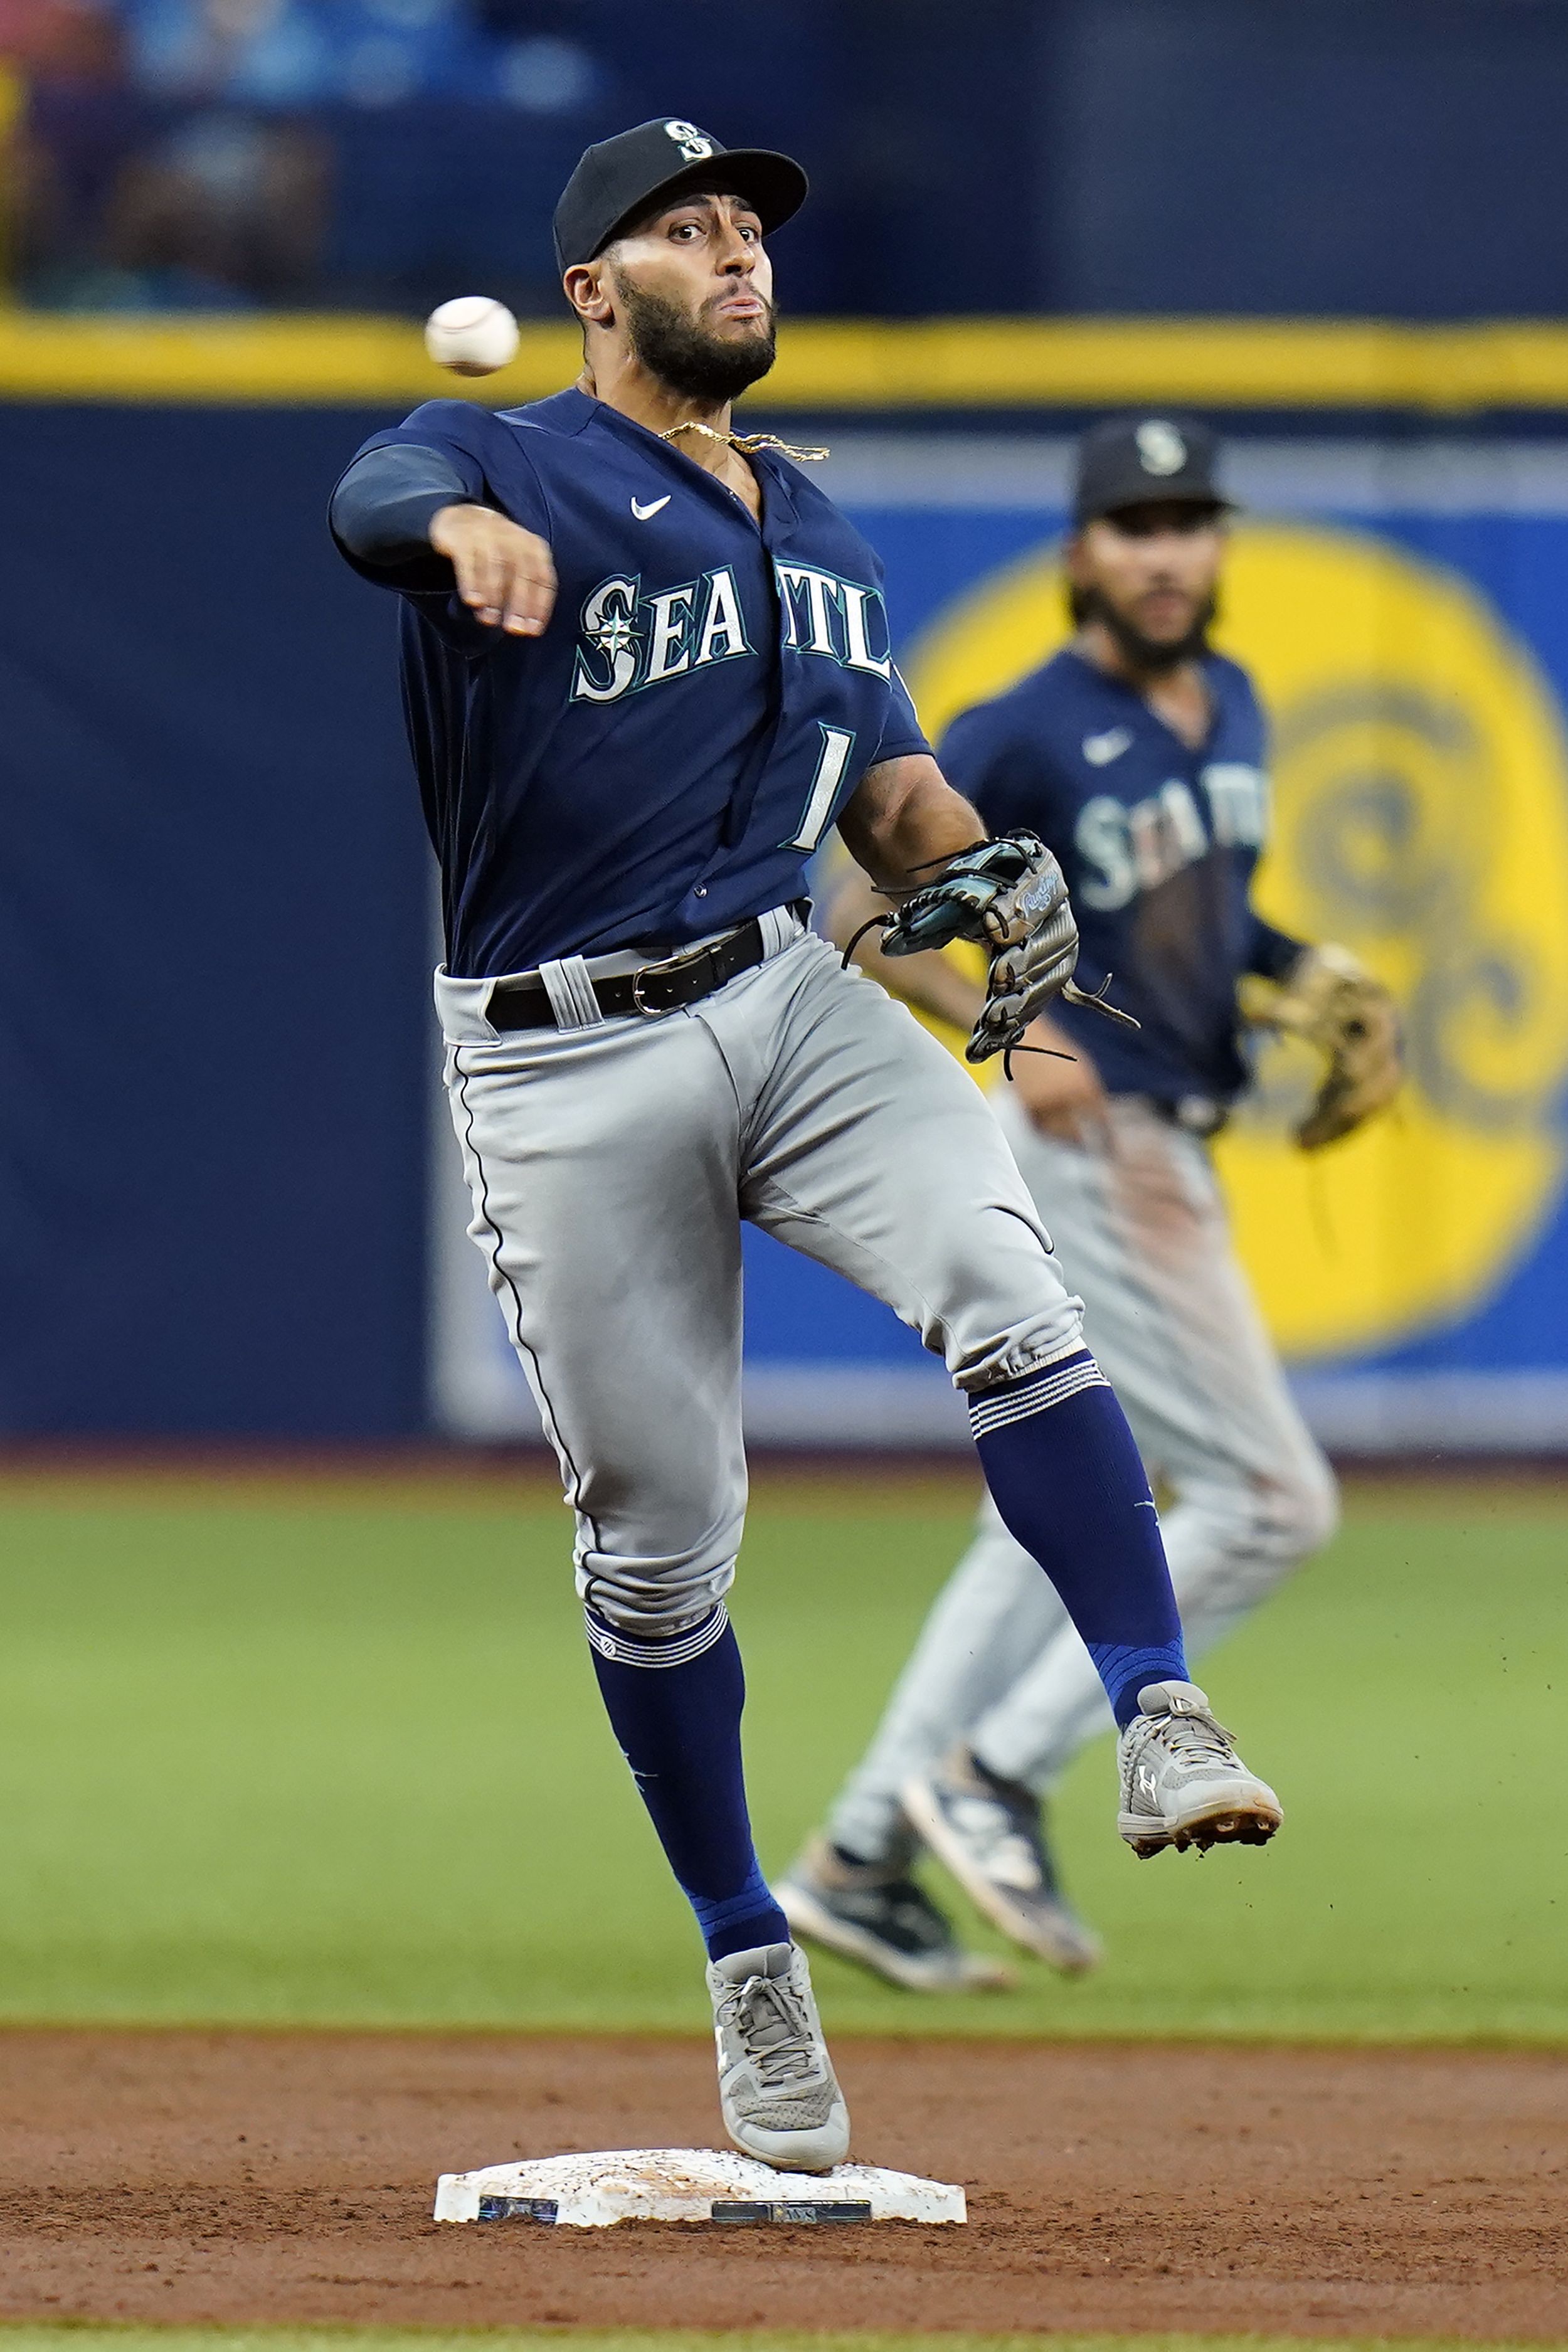 Mariners' Abraham Toro Appears to Be a Lock at Third Base